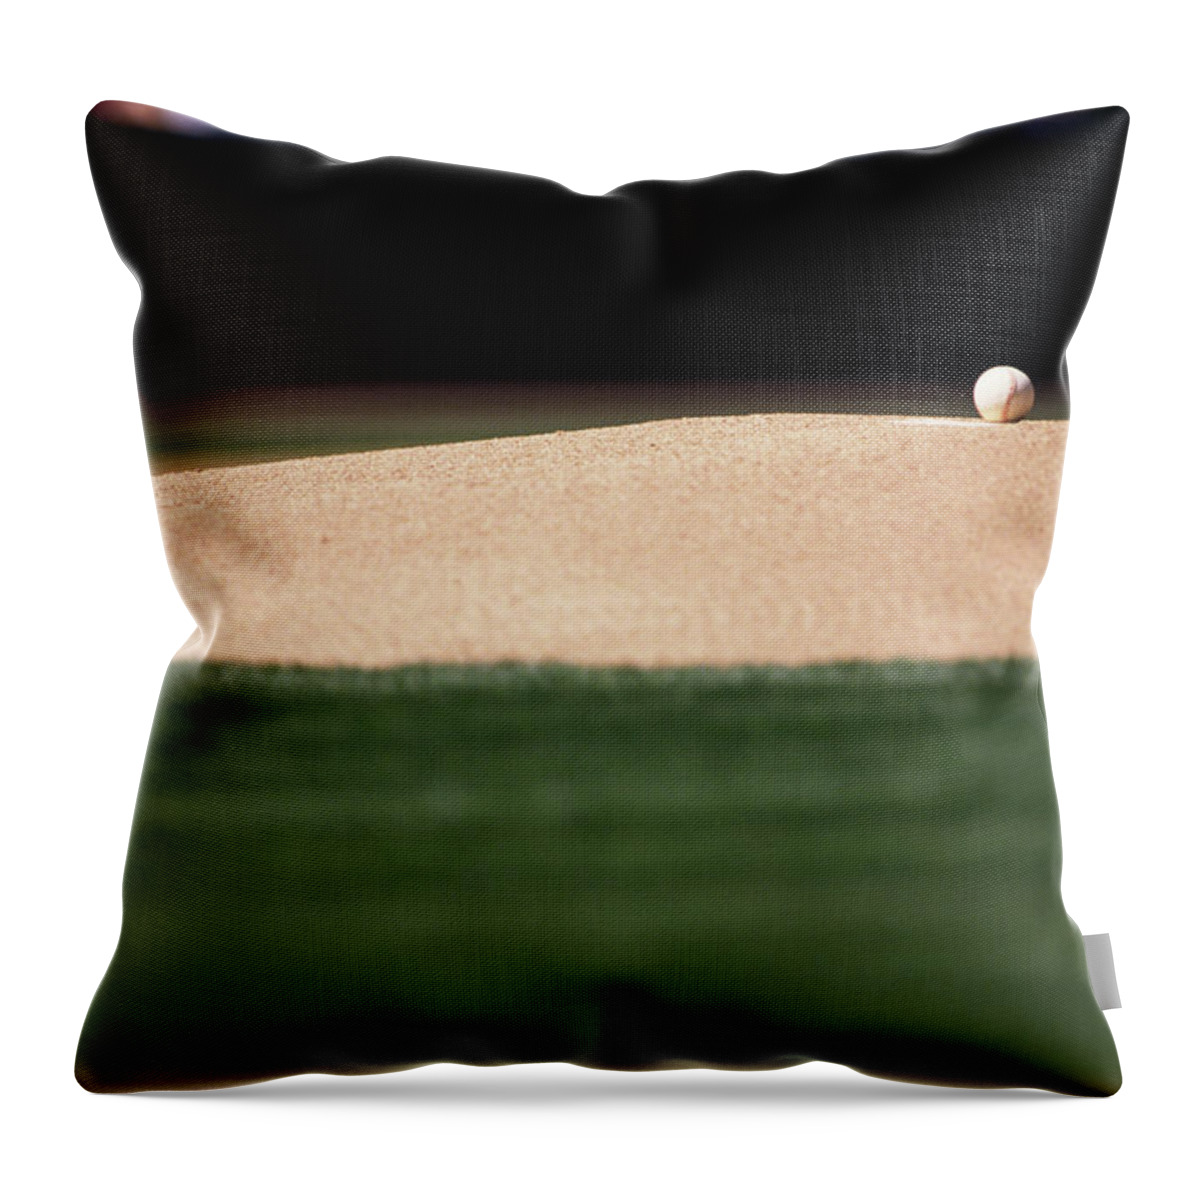 Ball Throw Pillow featuring the photograph Baseball On Pitchers Mound by William R. Sallaz